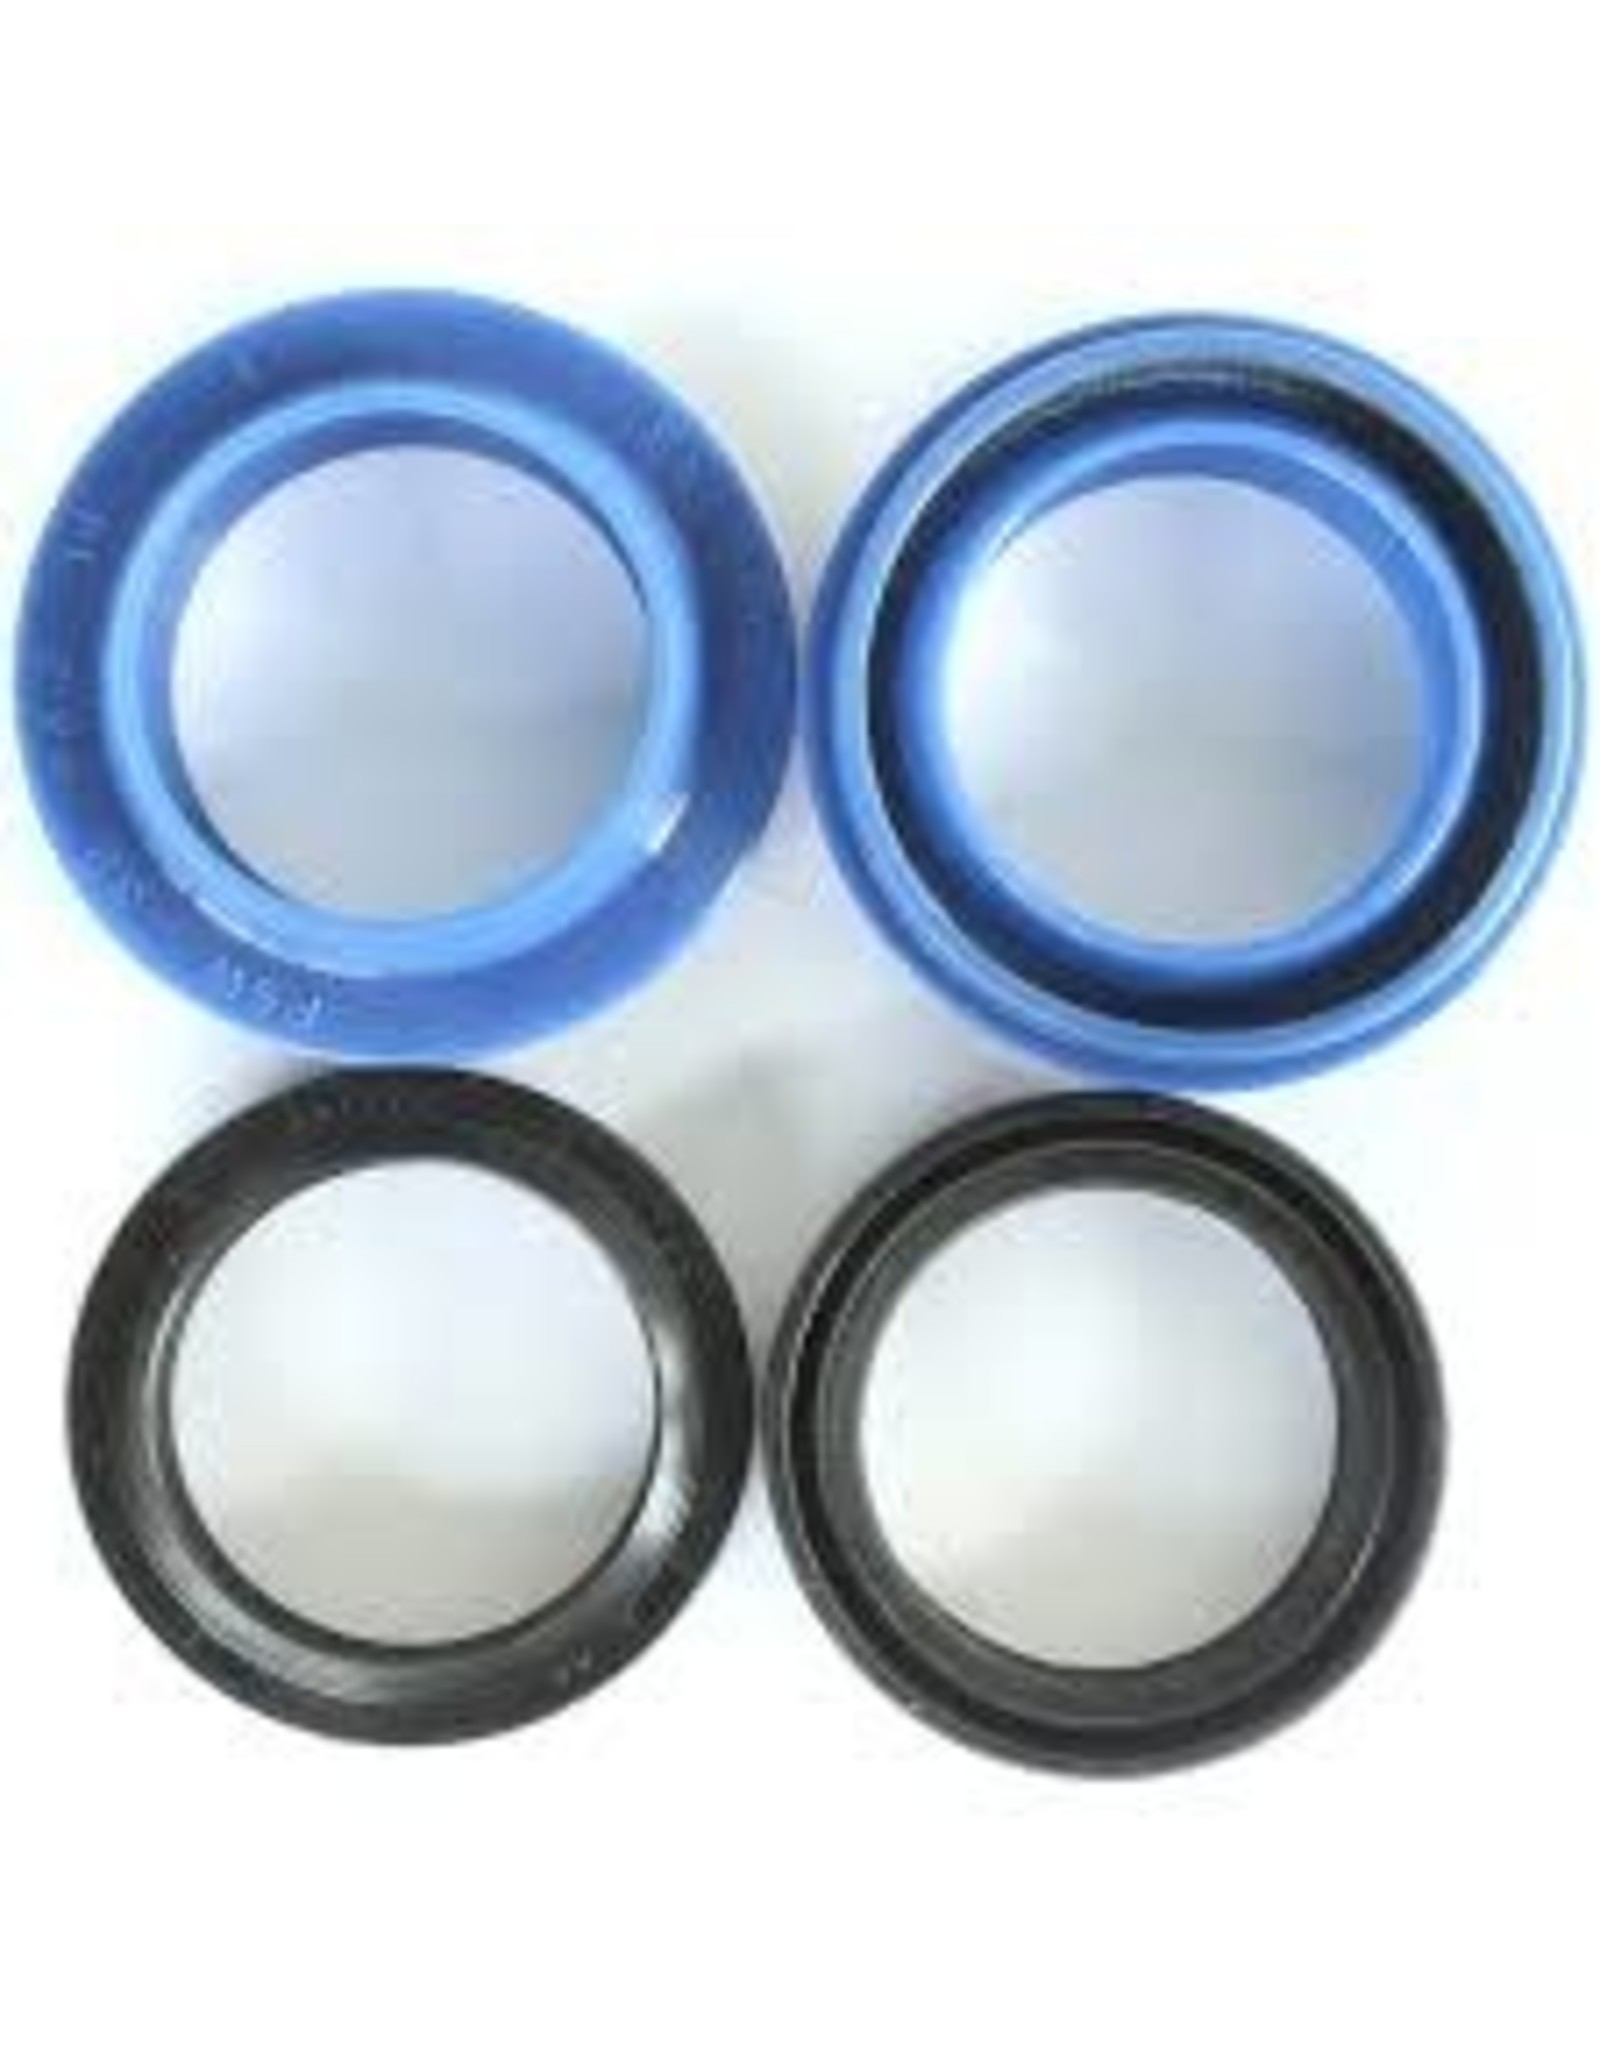 Enduro Fork Seal Kit Marzocchi 32mm With Wipers